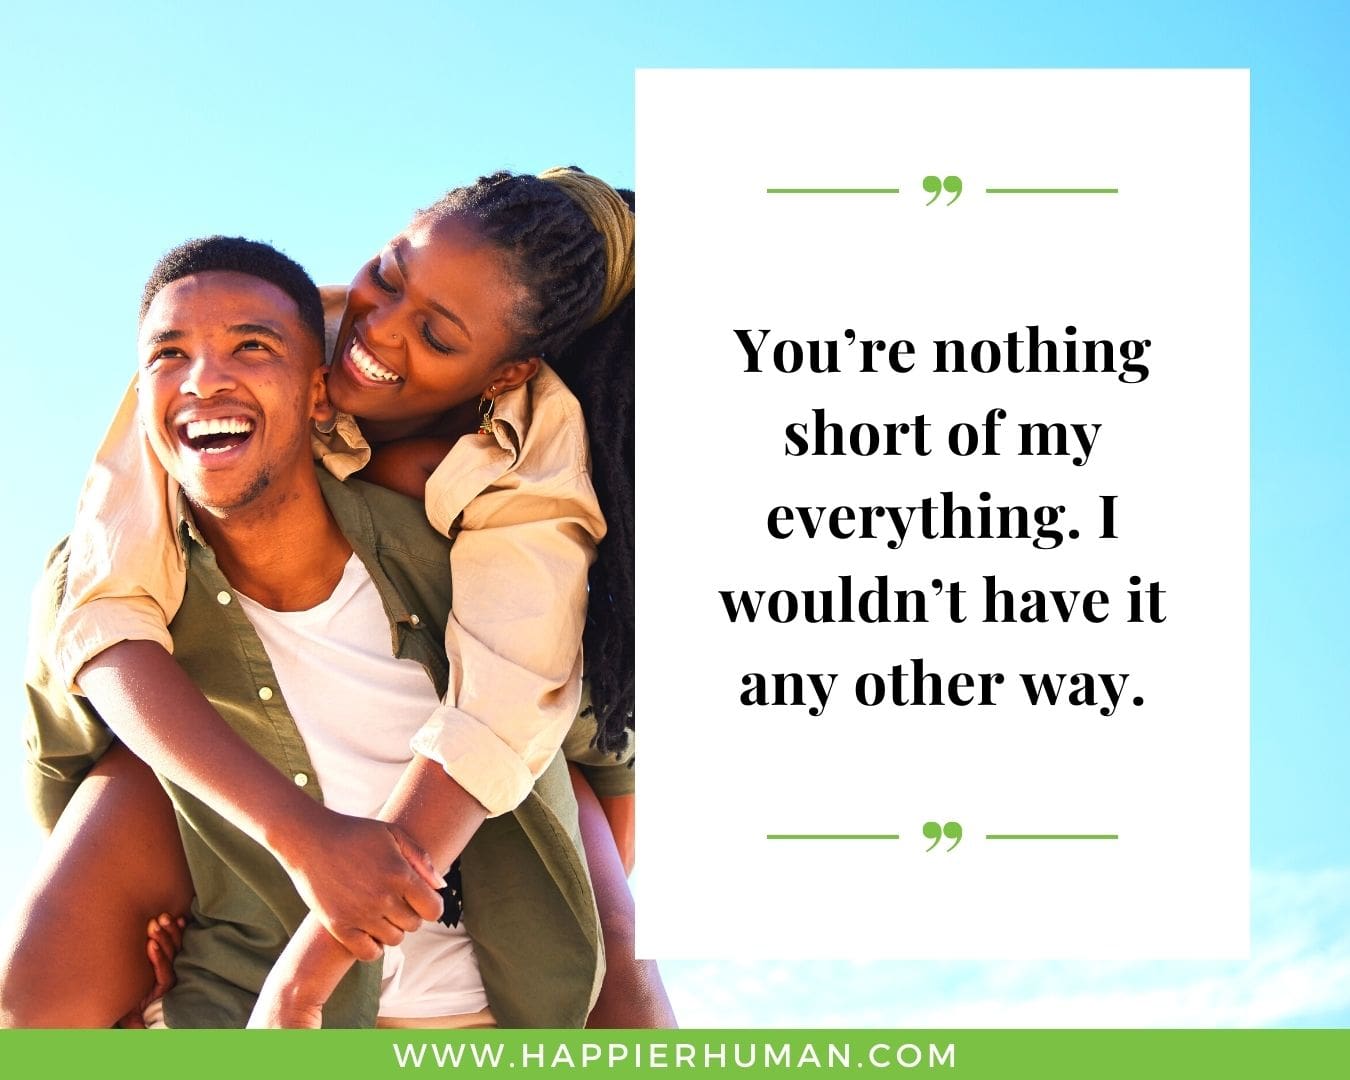 Loving Quotes for Her - “You’re nothing short of my everything. I wouldn’t have it any other way.”